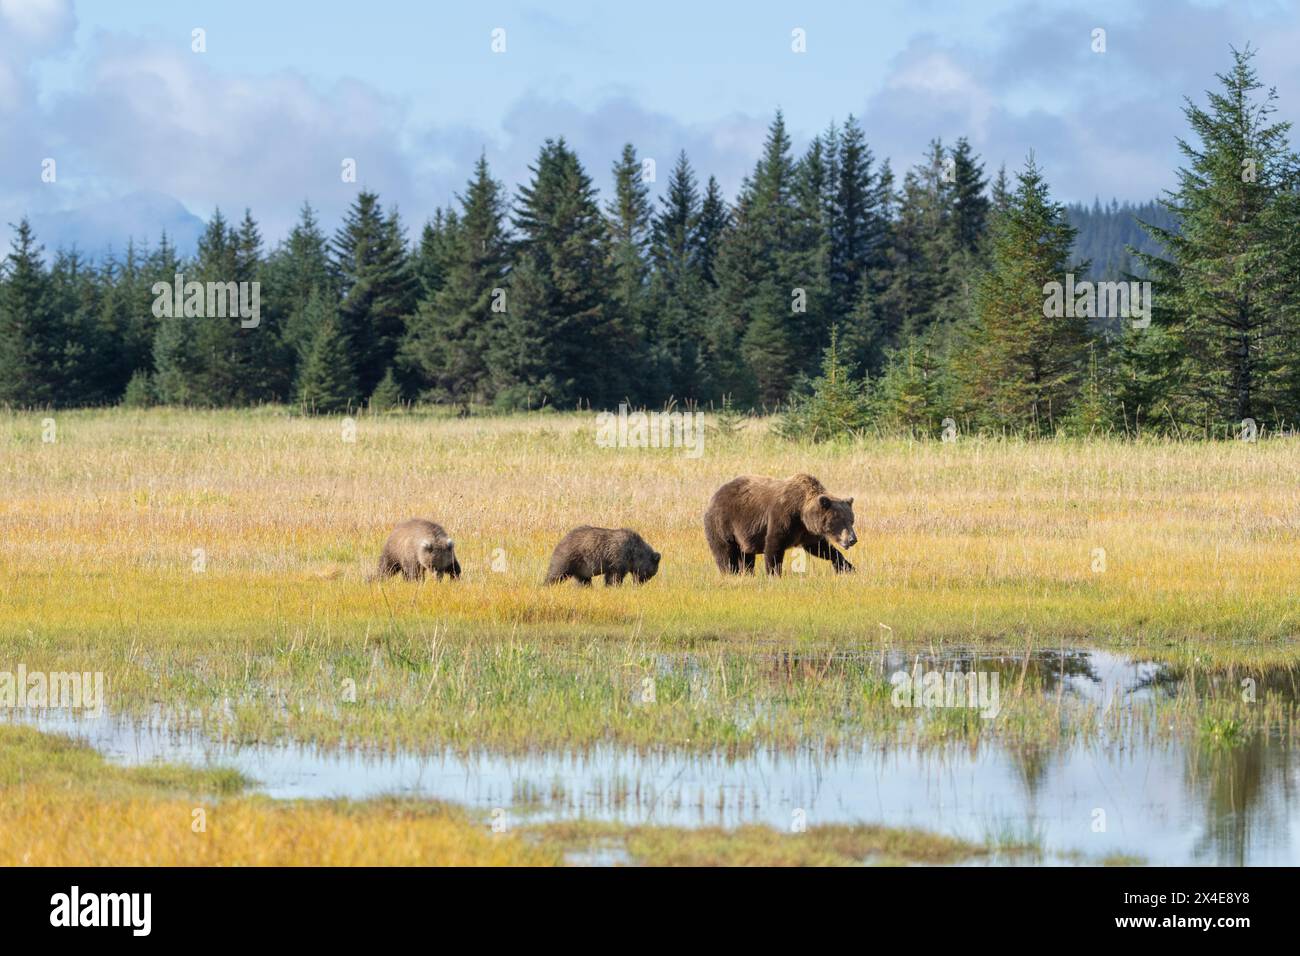 USA, Alaska, Lake Clark National Park. Grizzly bear mother and cubs in meadow. Stock Photo